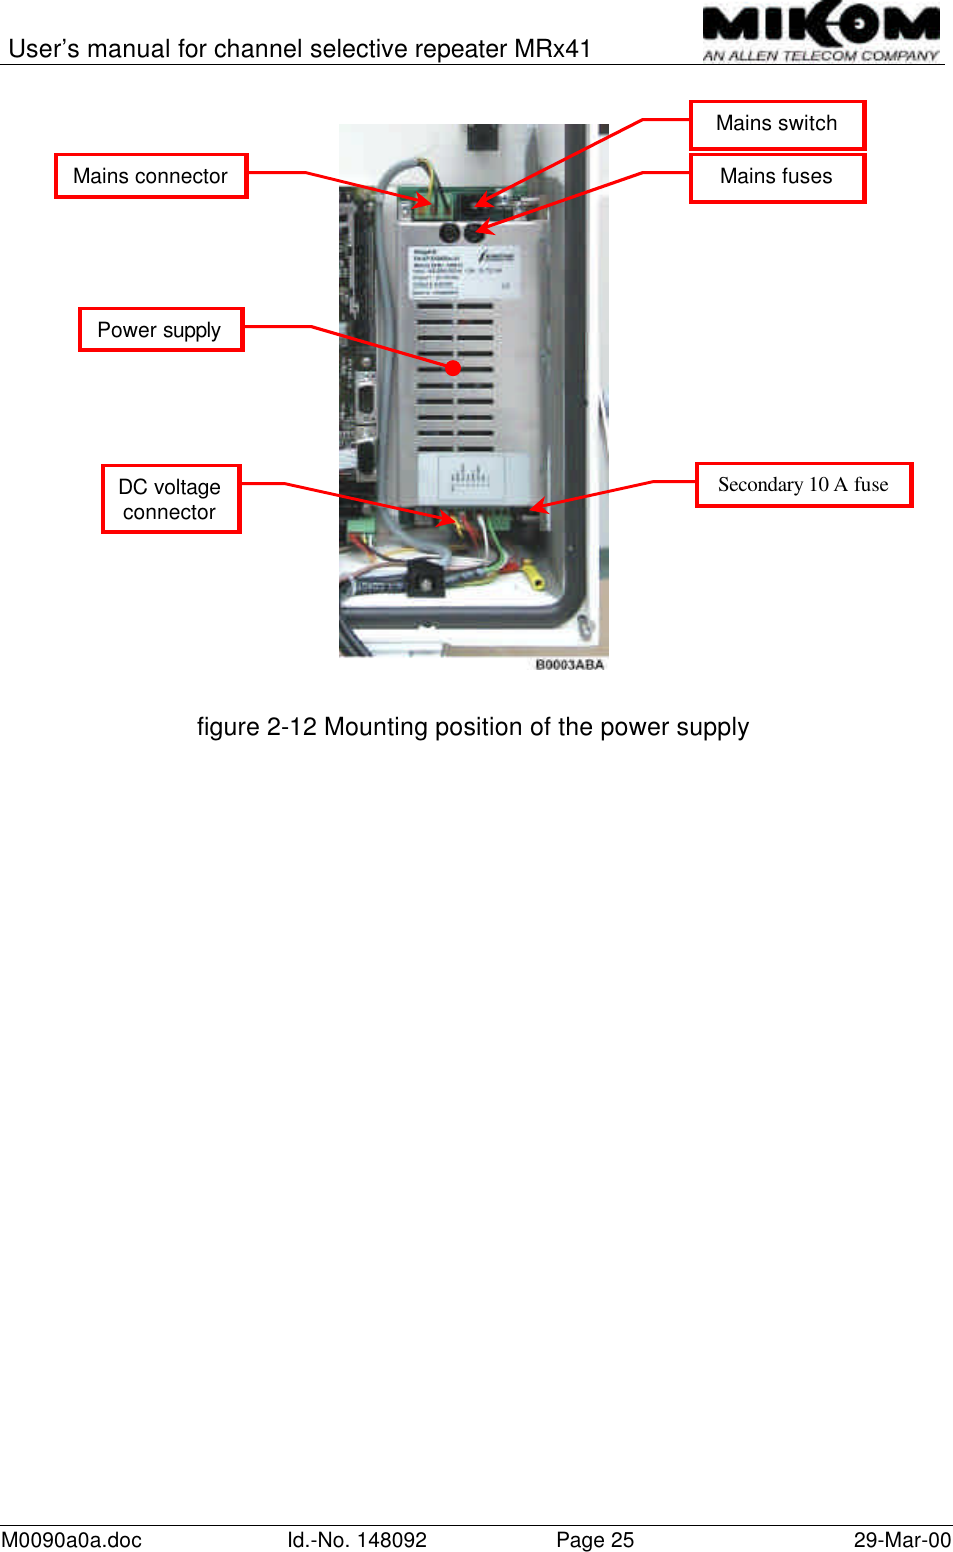 User’s manual for channel selective repeater MRx41M0090a0a.doc Id.-No. 148092 Page 25 29-Mar-00figure 2-12 Mounting position of the power supplyPower supplyMains fusesMains switchDC voltageconnectorSecondary 10 A fuseMains connector